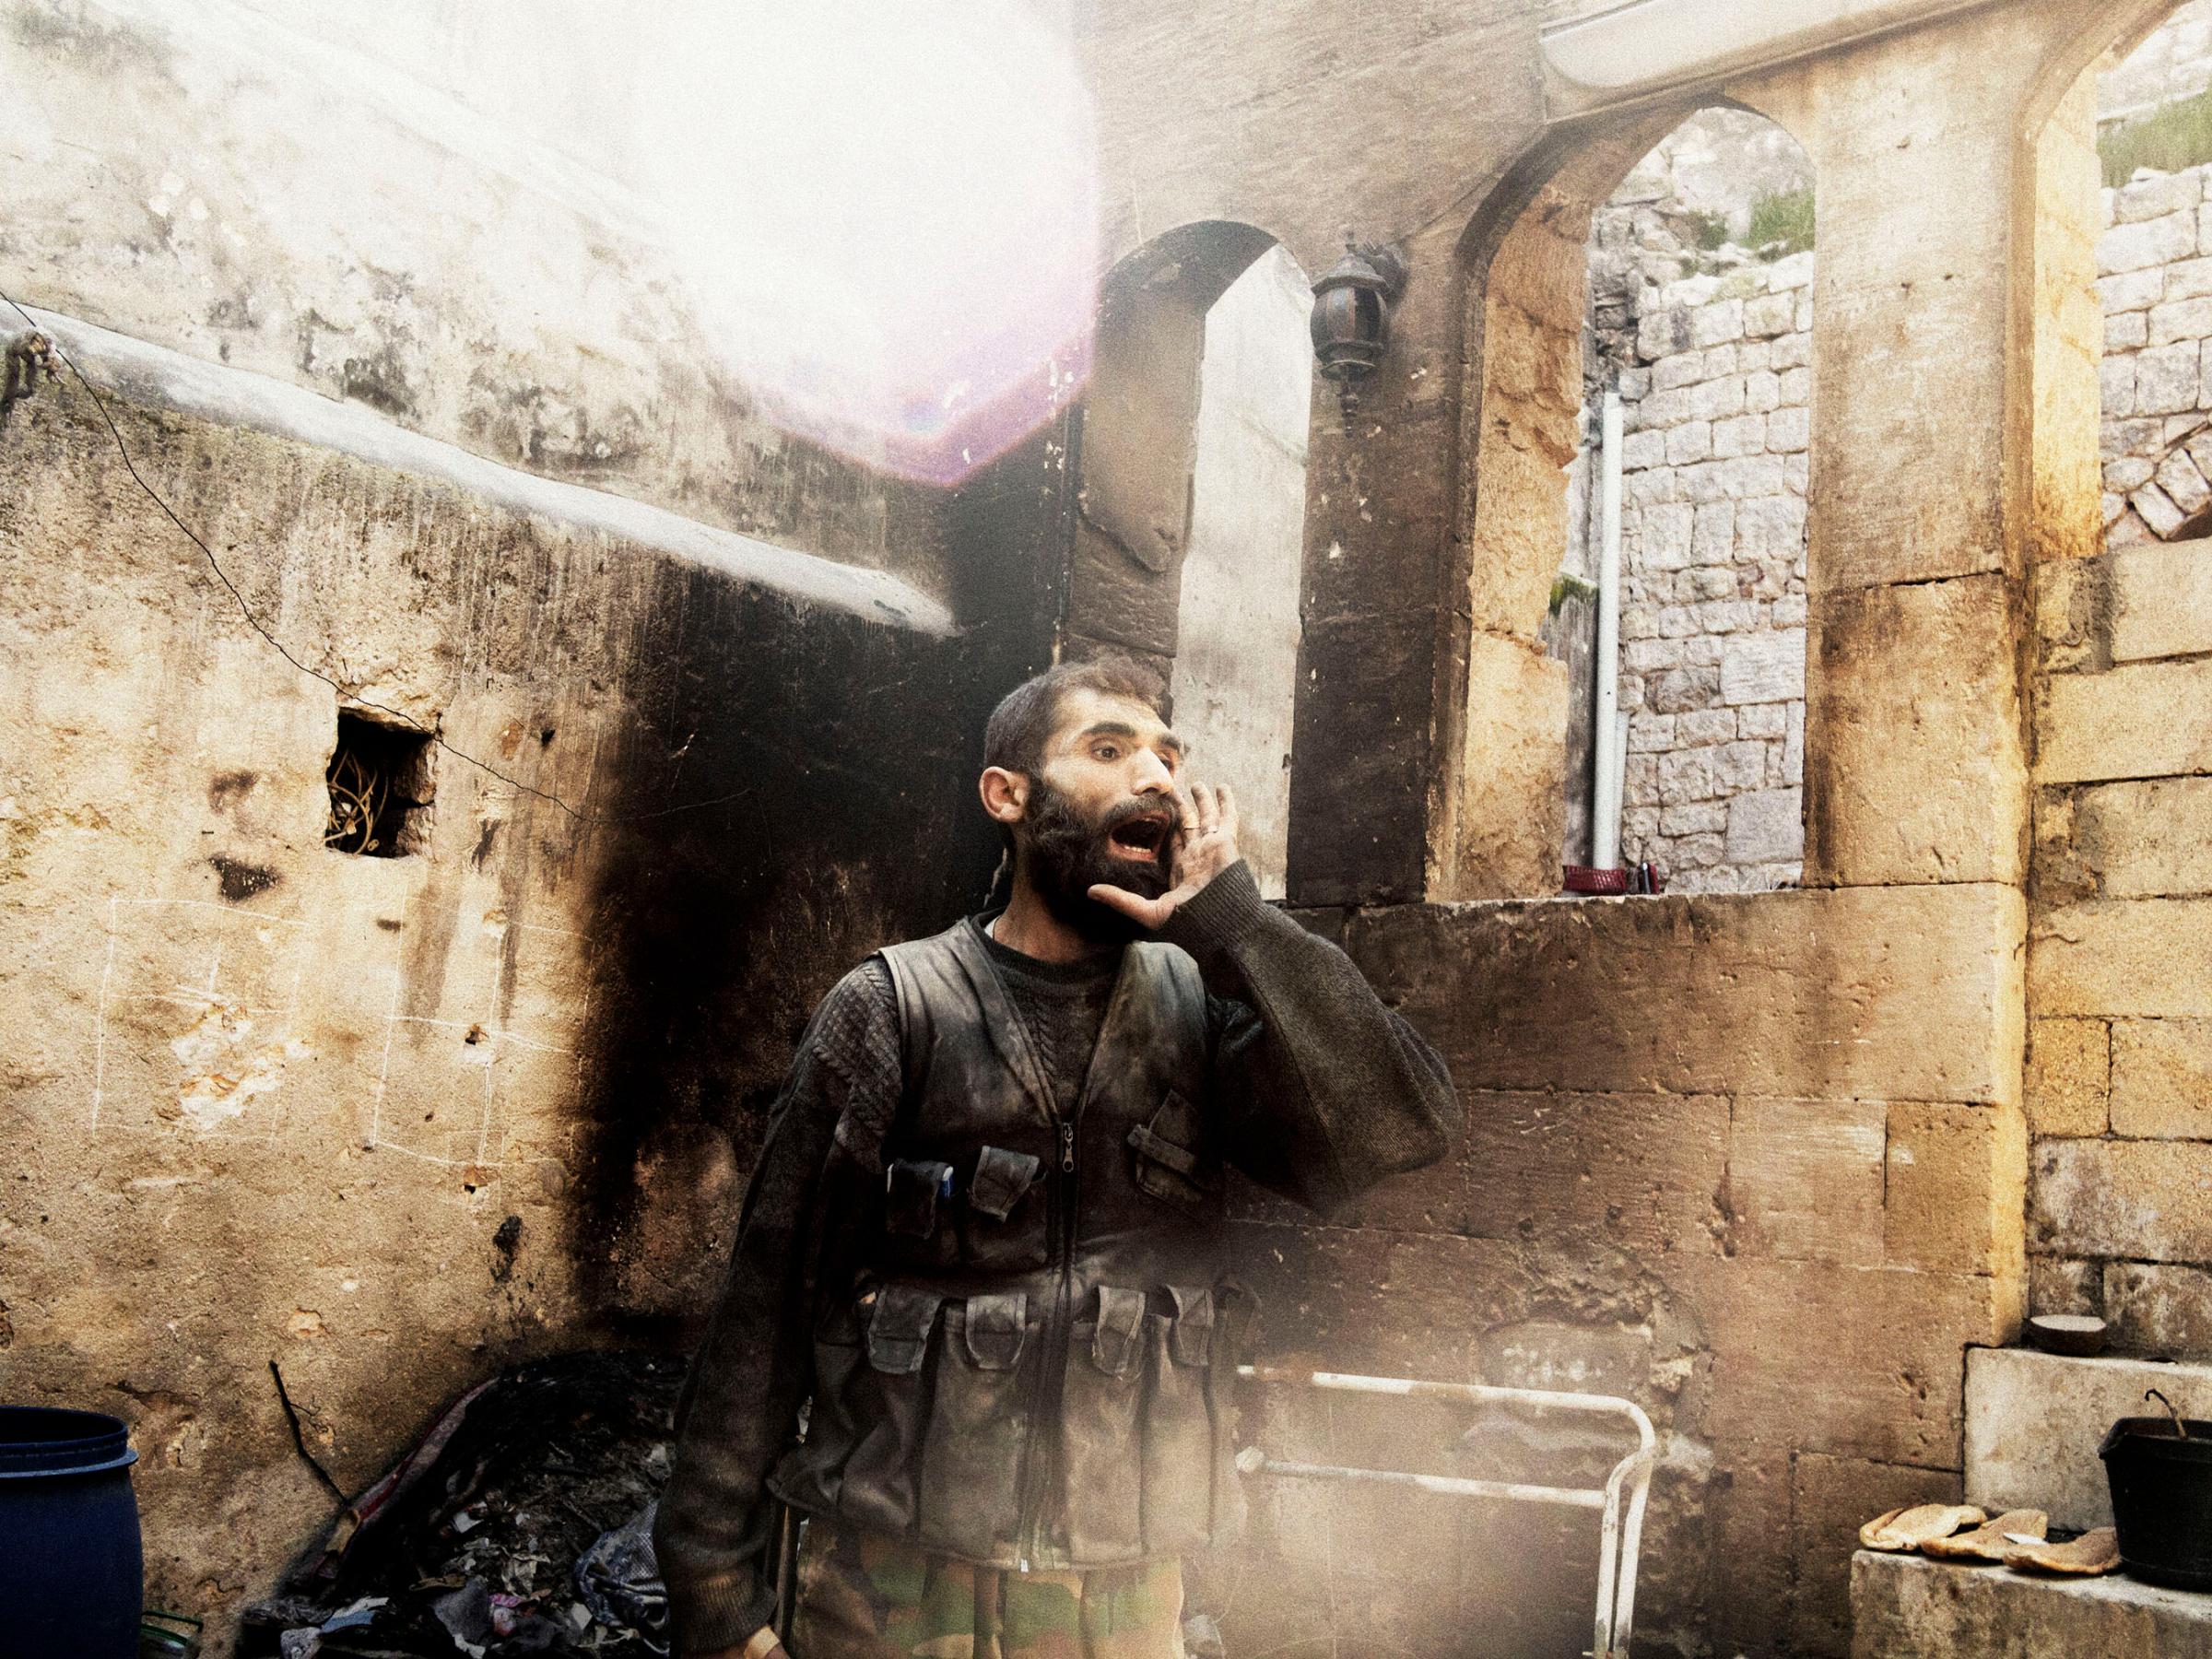 SYRIA. Aleppo. 2013.  A rebel yells “Allahu Akbar” (God is Great) during close-quarters fighting in Aleppo’s Old City.